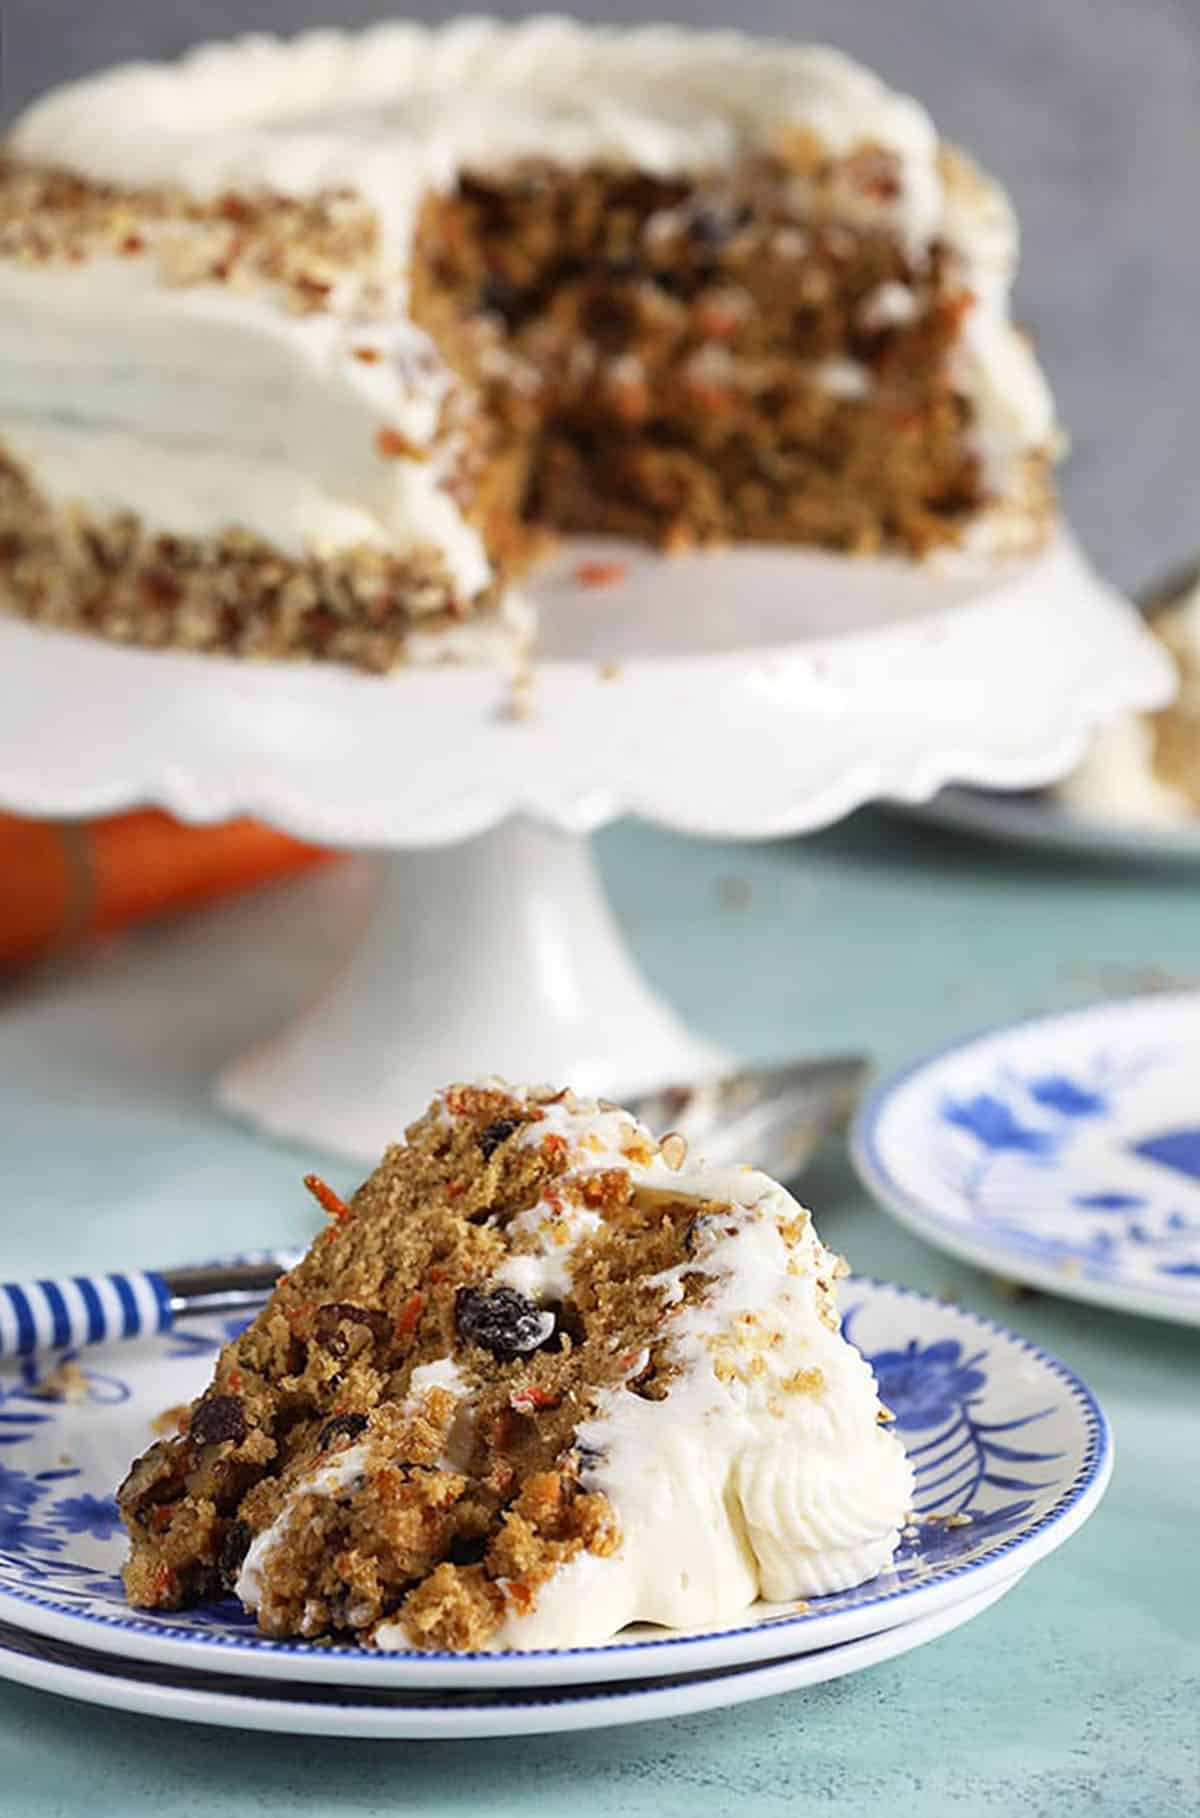 Carrot Cake Layer cake with a slice on a blue and white plate.